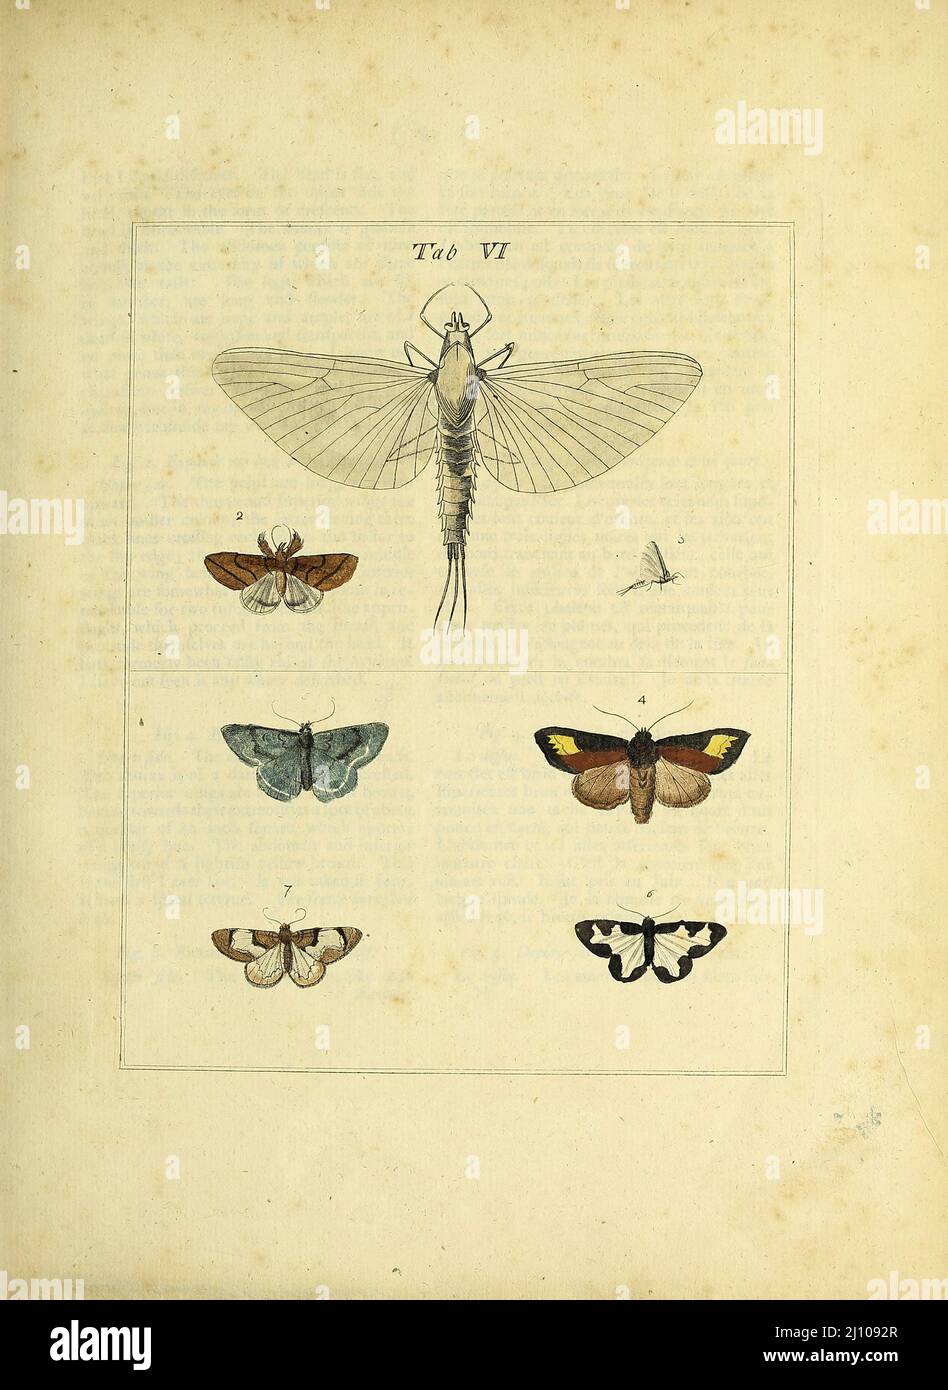 Butterflies and Moths from the book An exposition of English insects : including the several classes of Neuroptera, Hymenoptera, & Diptera, or bees, flies, & Libellulae : exhibiting on 51 copper plates near 500 figures, accurately drawn & highly finished in colours, from nature : the whole minutely described, arranged & named, according to the Linnean system, with remarks : the figures of a great number of moths not in the Aurelian collection : formerly published by the same author and a plate with an explanation of colours, are likewise given in the work by  Moses Harris, 1730 - 1788, author Stock Photo